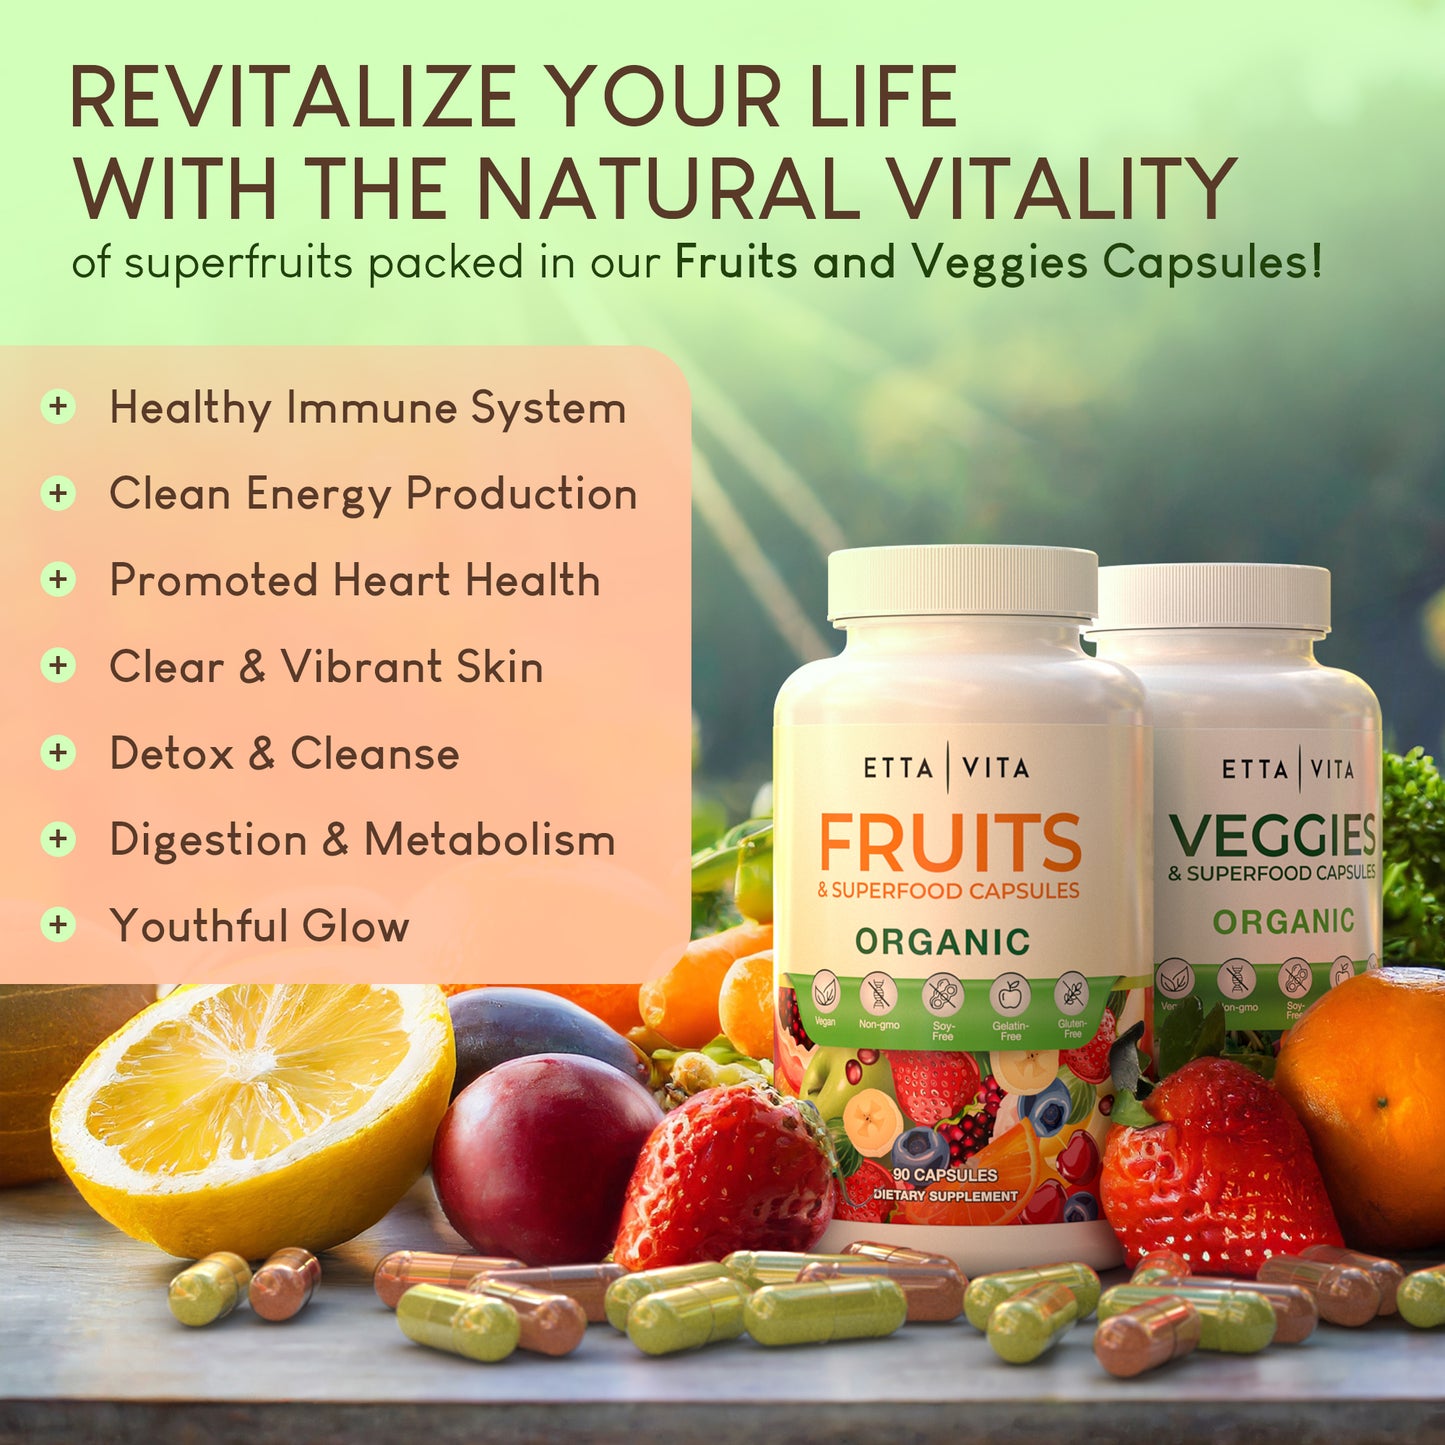 USDA Certified Organic Fruits and Veggies Supplement for Detox & Cleanse